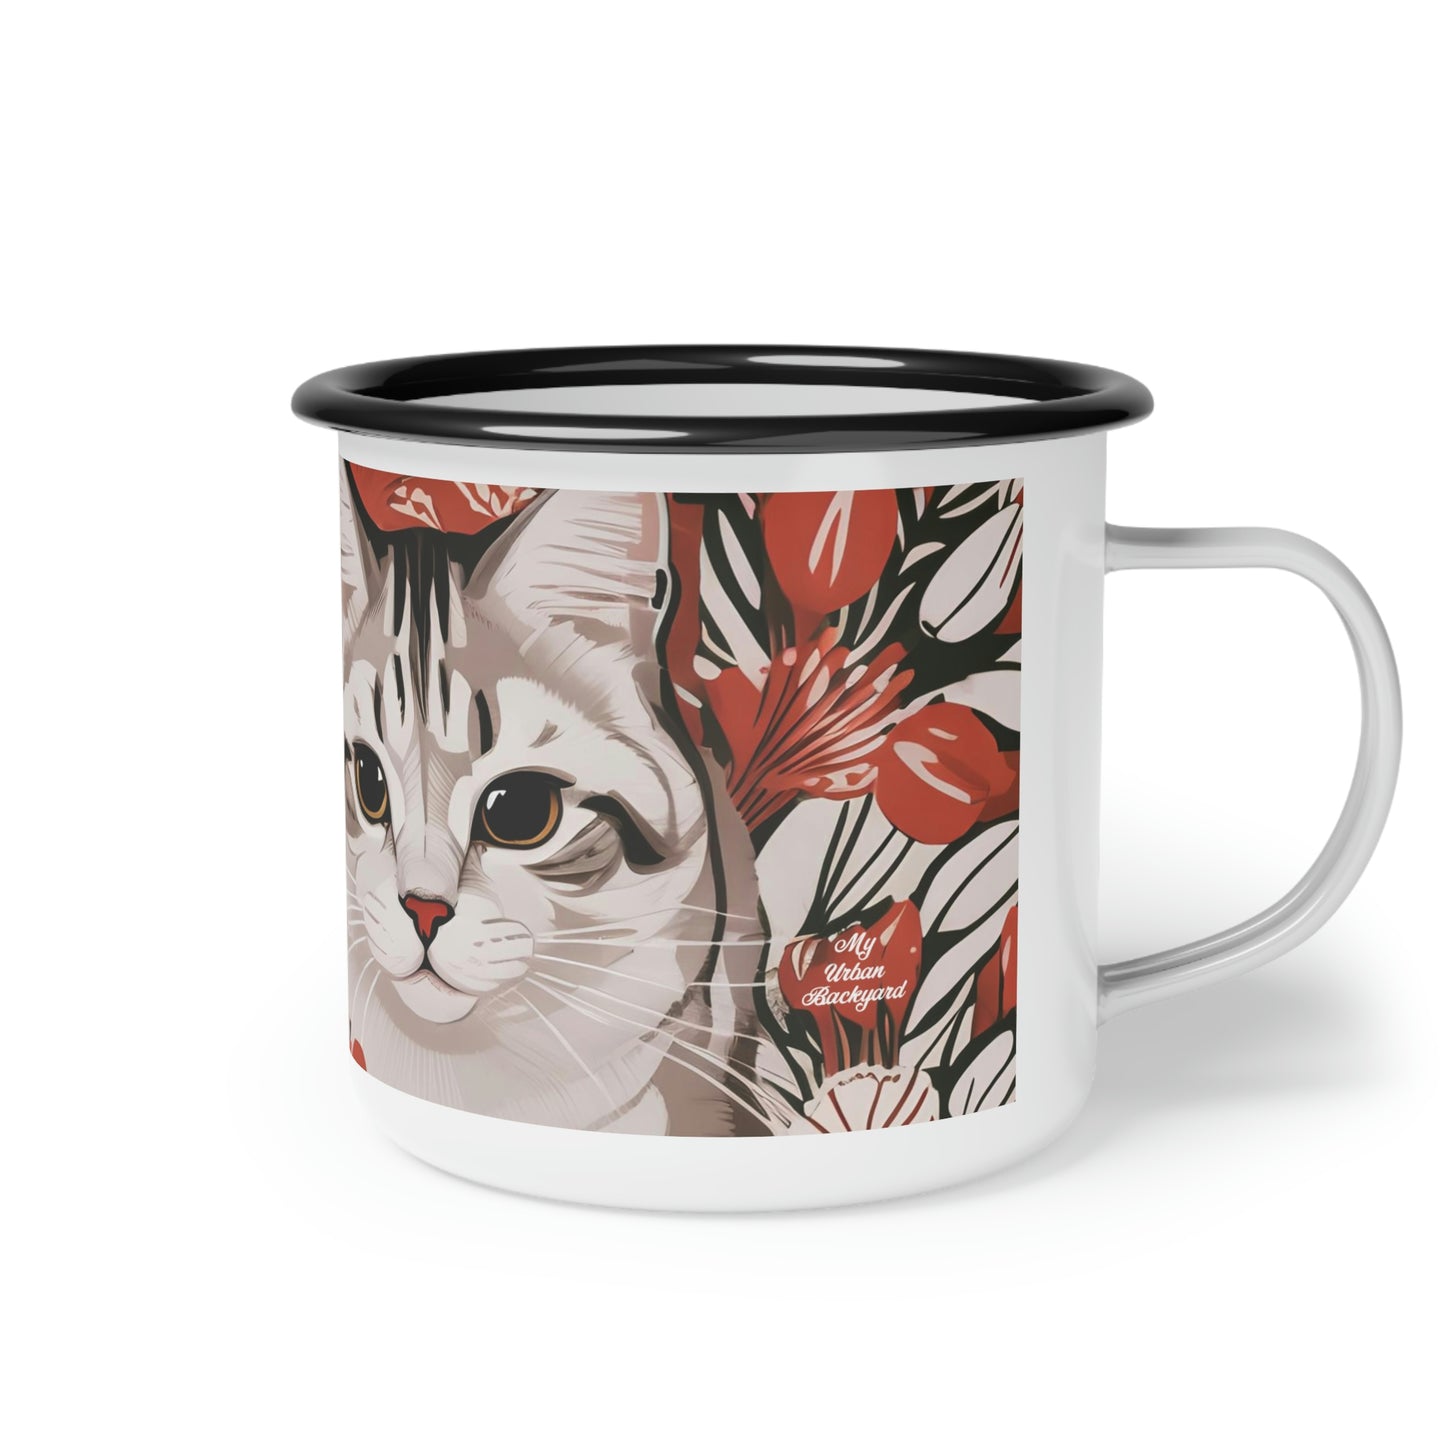 White Cats, Enamel Camping Mug for Coffee, Tea, Cocoa, or Cereal - 12oz